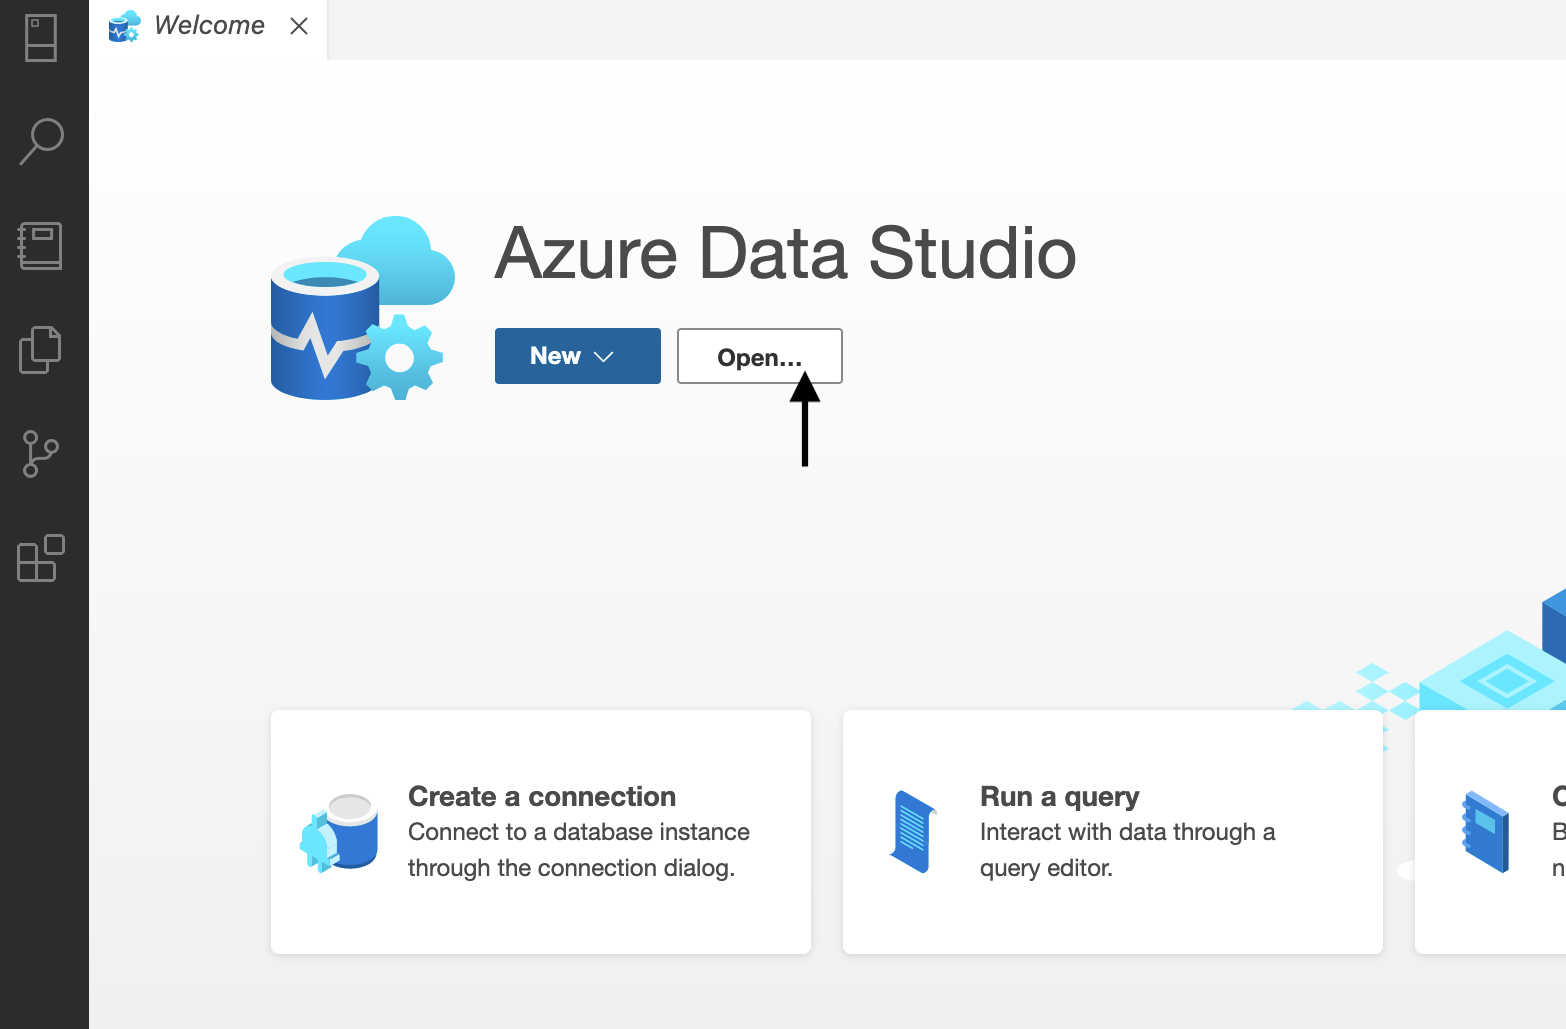 Welcome screen for Azure Data Studio with arrow pointing to open button.